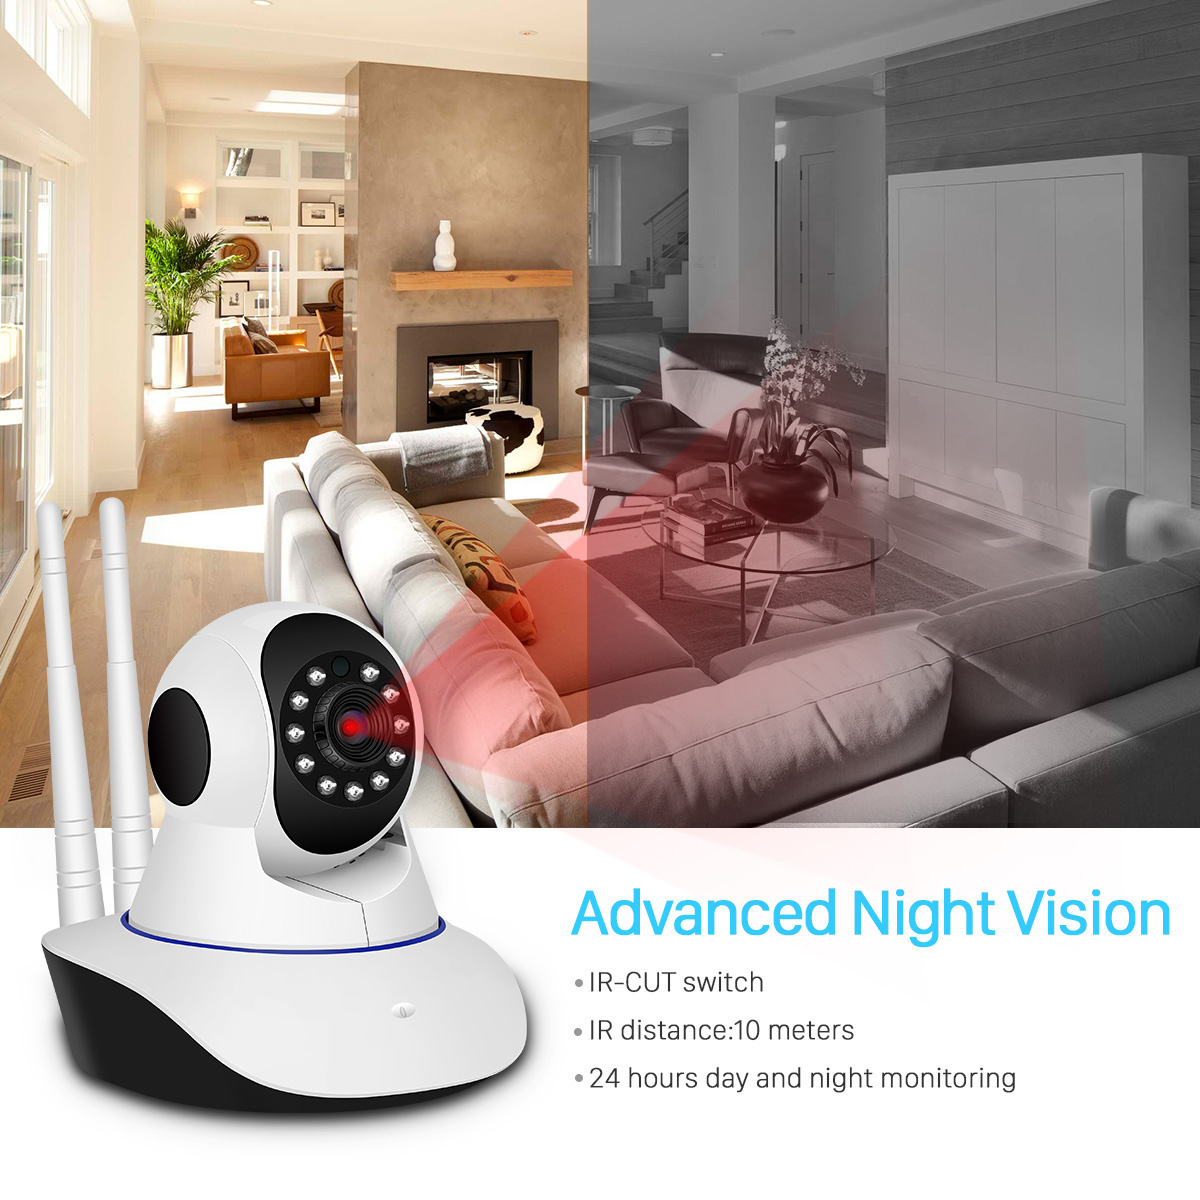 BESDER Full HD 1080P WIFI Camera Two-way Audio P2P Motion Alarm Home Security Wireless IP Camera Baby Monitor SD Card Slot iCsee